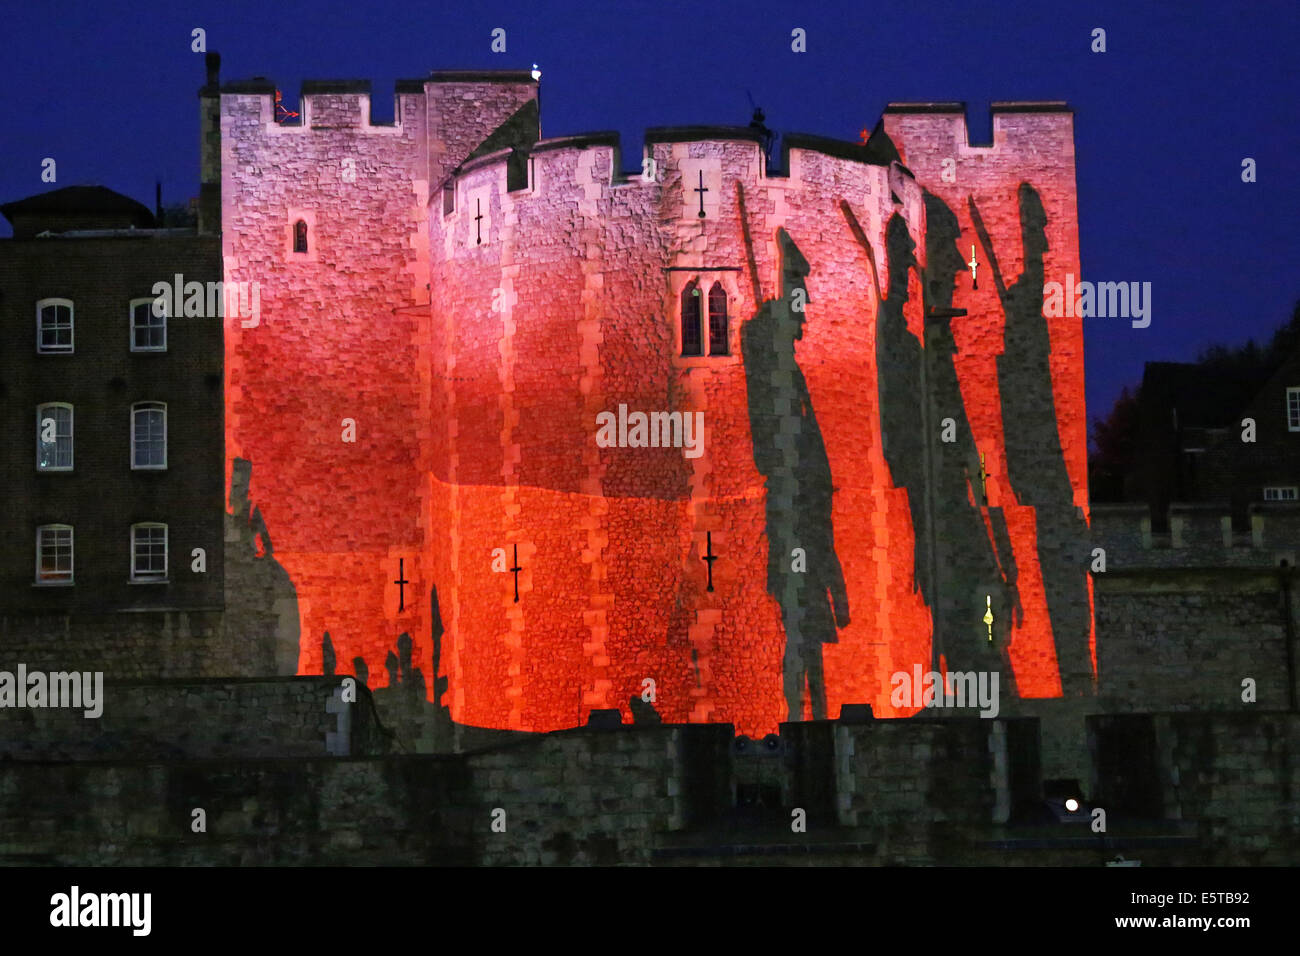 London, UK. 5th August 2014. The opening of the  Blood Swept Lands and Seas of Red artwork by Paul Cummins at the Tower of London. 888,246 ceramic poppies, each poppy representing a British or Colonial military fatality during the war, will fill the moat by November 11th. For the opening, battlefield images were projected onto the central tower while Tim Pigott-Smith read out names of the fallen during a 21 gun salute. The evening ended with the playing of the last post. Credit:  Paul Brown/Alamy Live News Stock Photo